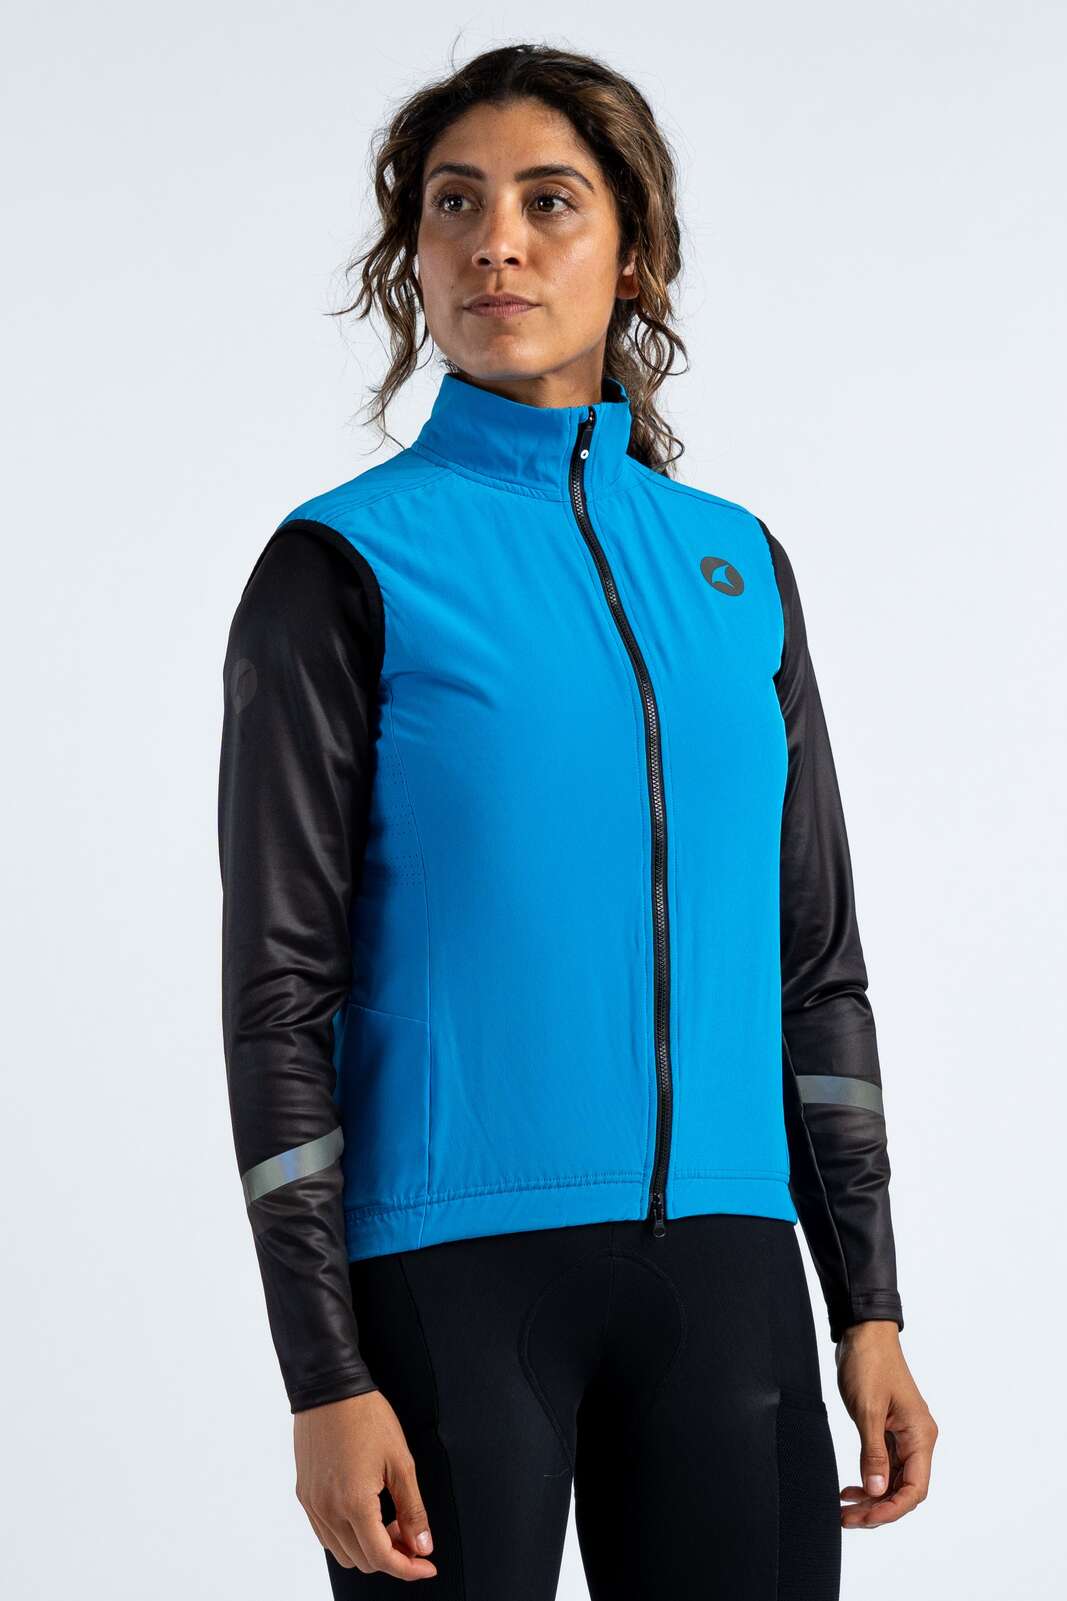 Women's Blue Thermal Cycling Vest - Alpine Front View